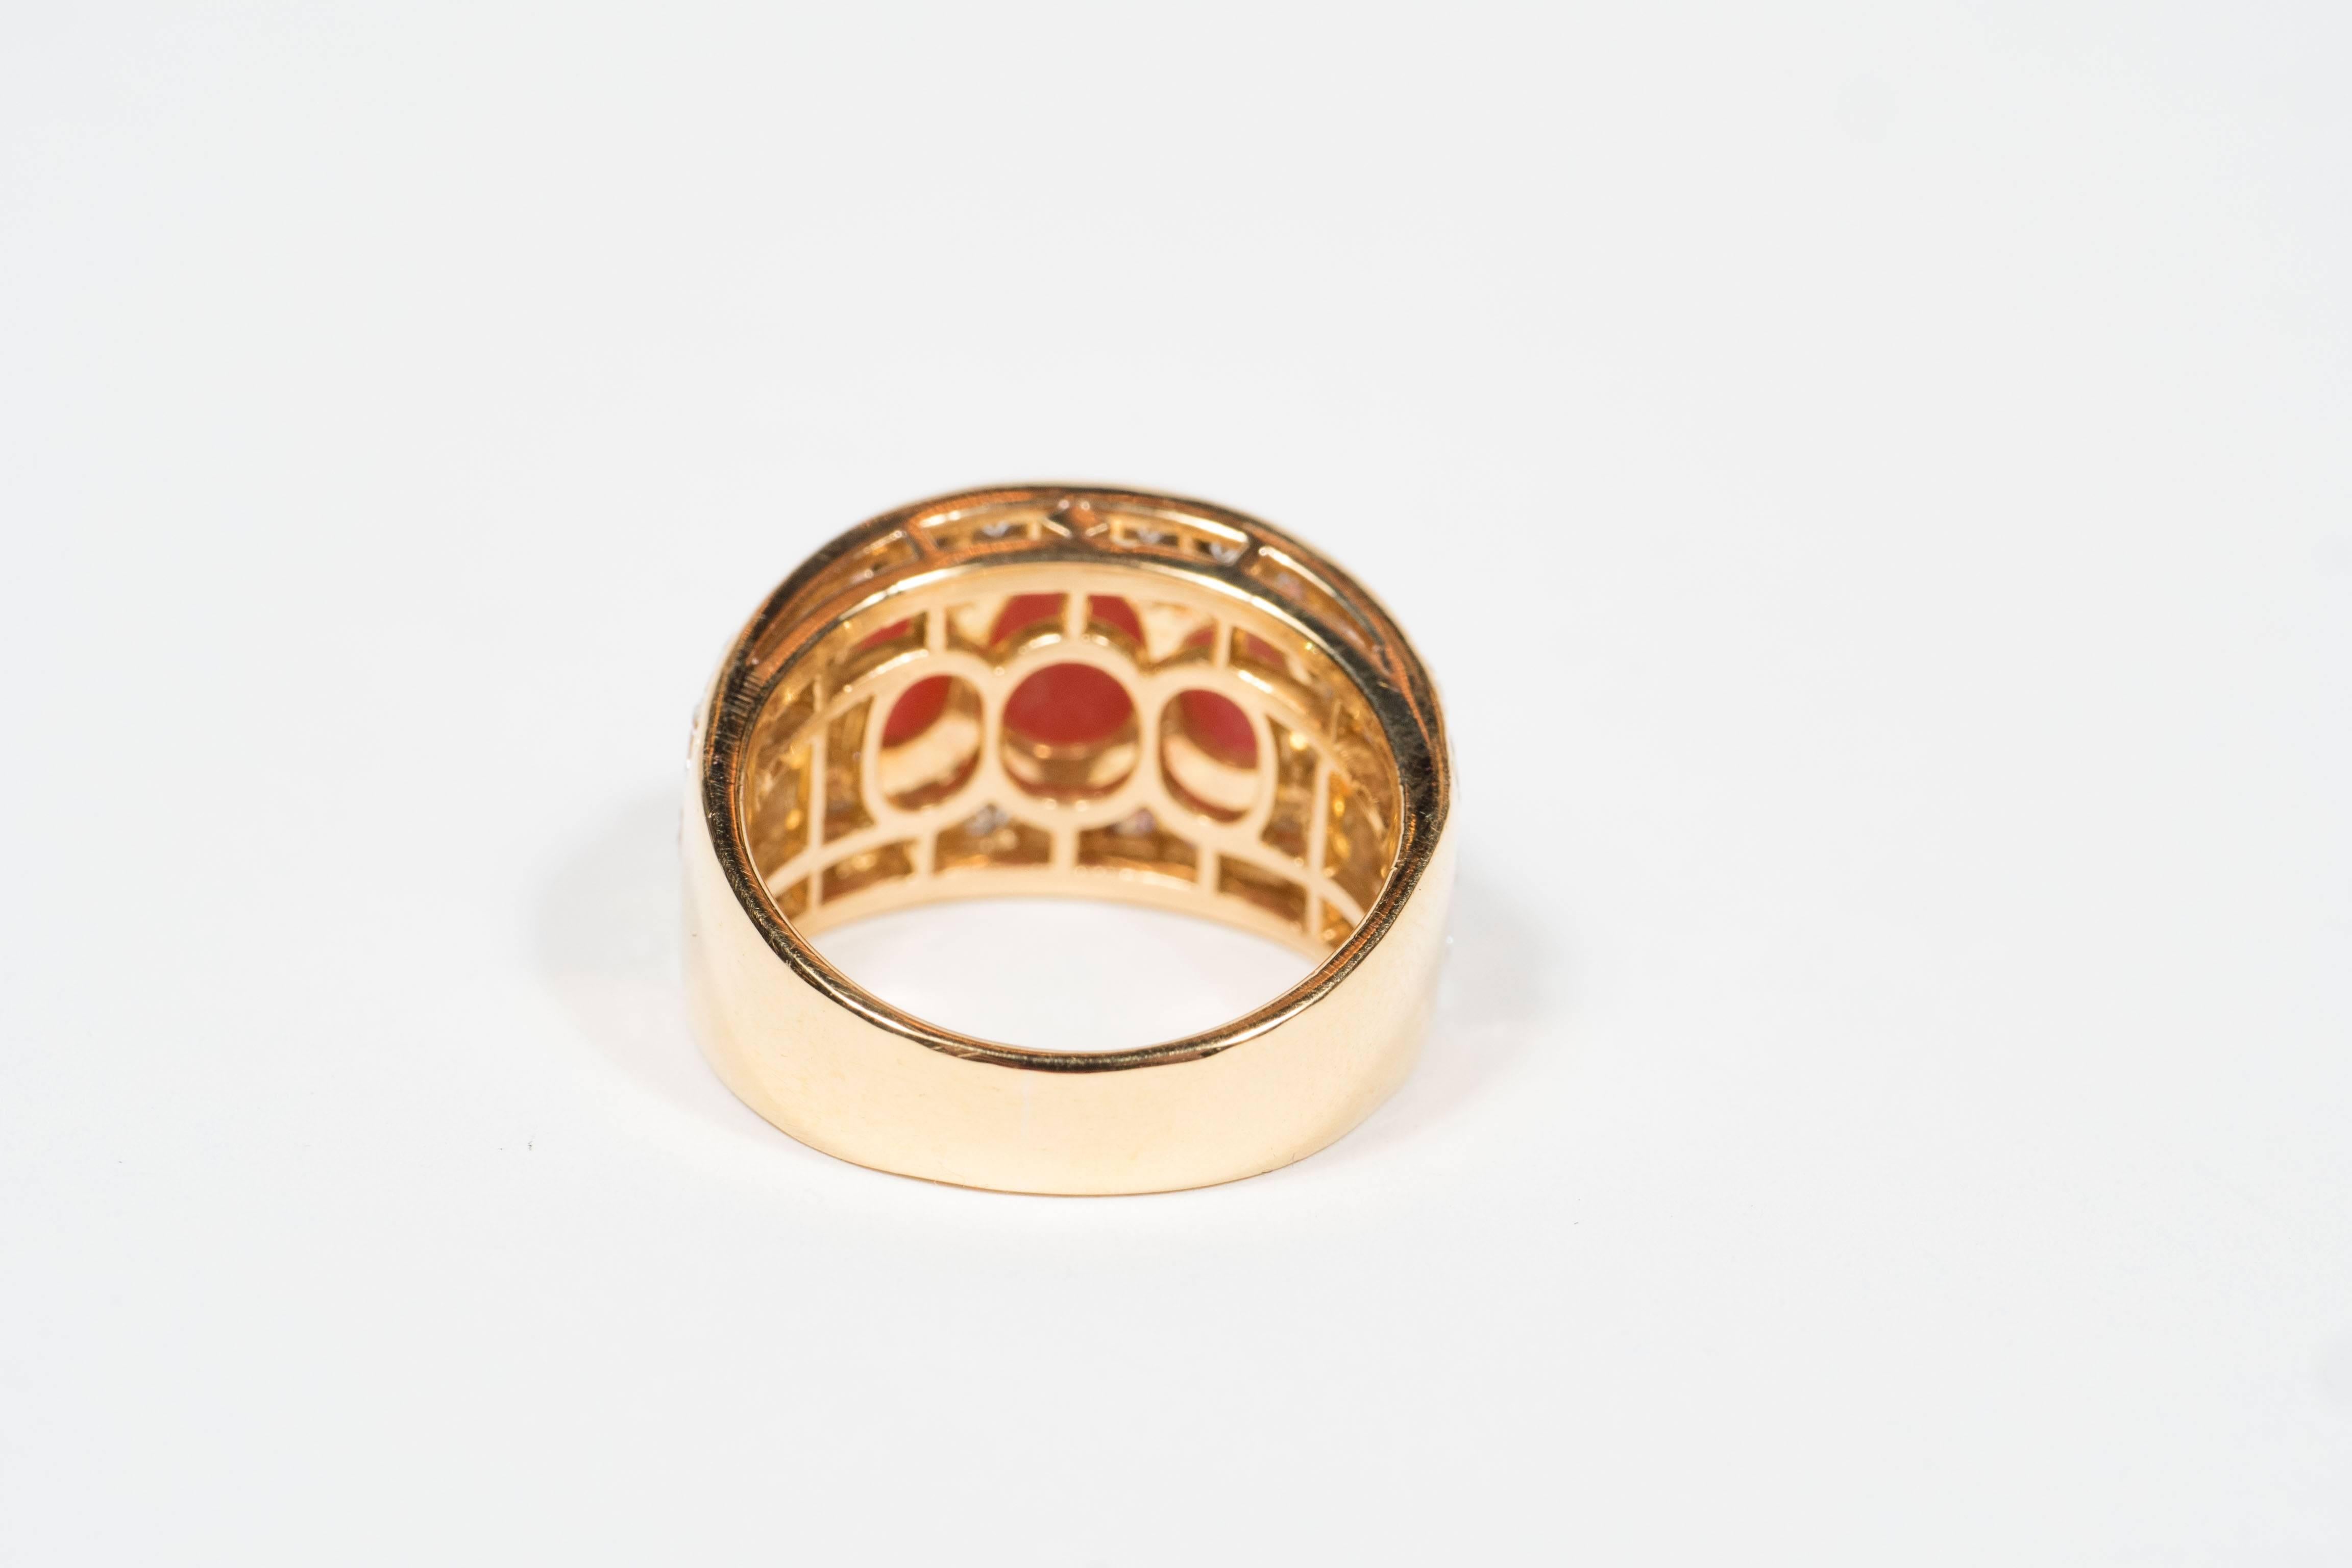 This stunning Mid-Century modernist Bulgari ring is made in Italy of 18k yellow gold centering 3 oval coral cabochons measuring approximately 7.9 by 5.6 to 7.0 by 4.4 mm, accented by 32 round and 4 baguette diamonds weighing approximately 1.55